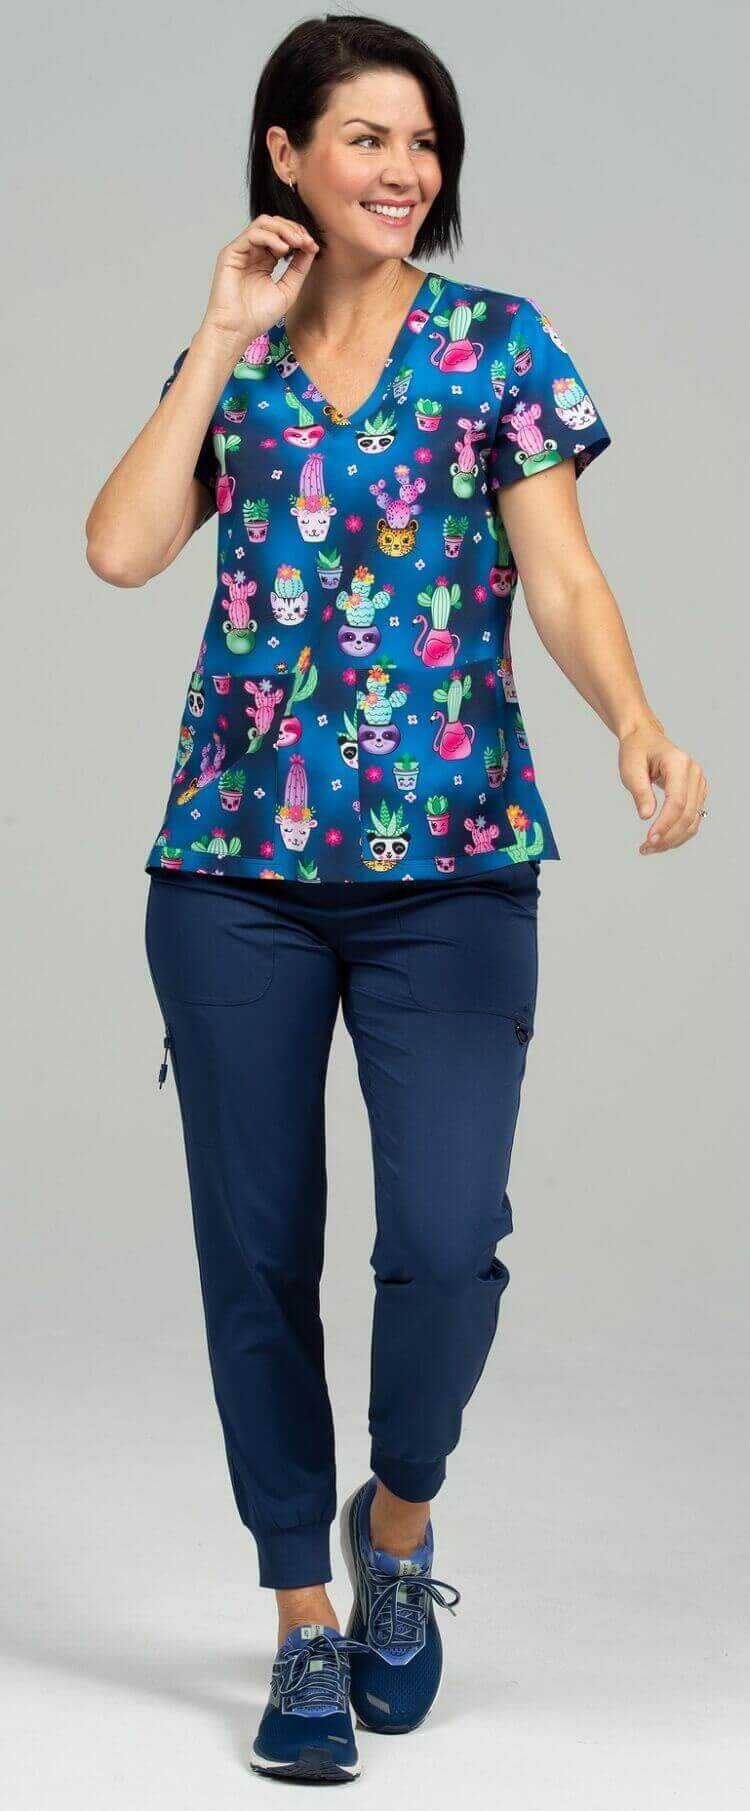 A female LPN wearing a Women's Print Scrub Top from Meraki Sport in "Stuck on You" size Small featuring 2 front patch pockets & shoulder yokes for a flattering shape.